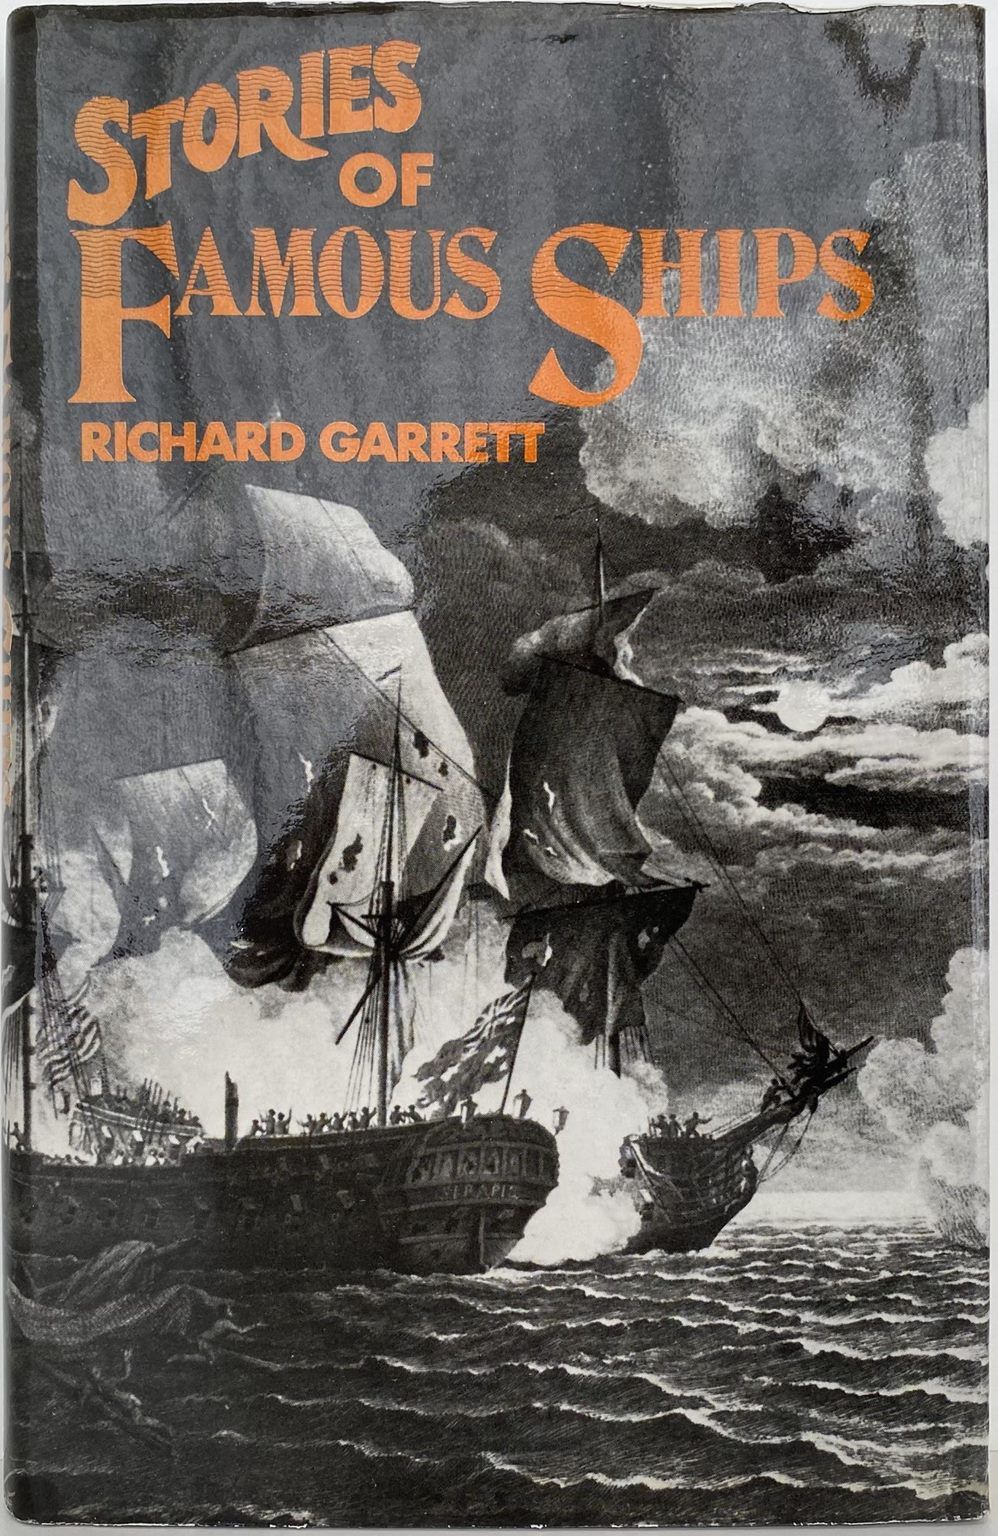 STORIES OF FAMOUS SHIPS